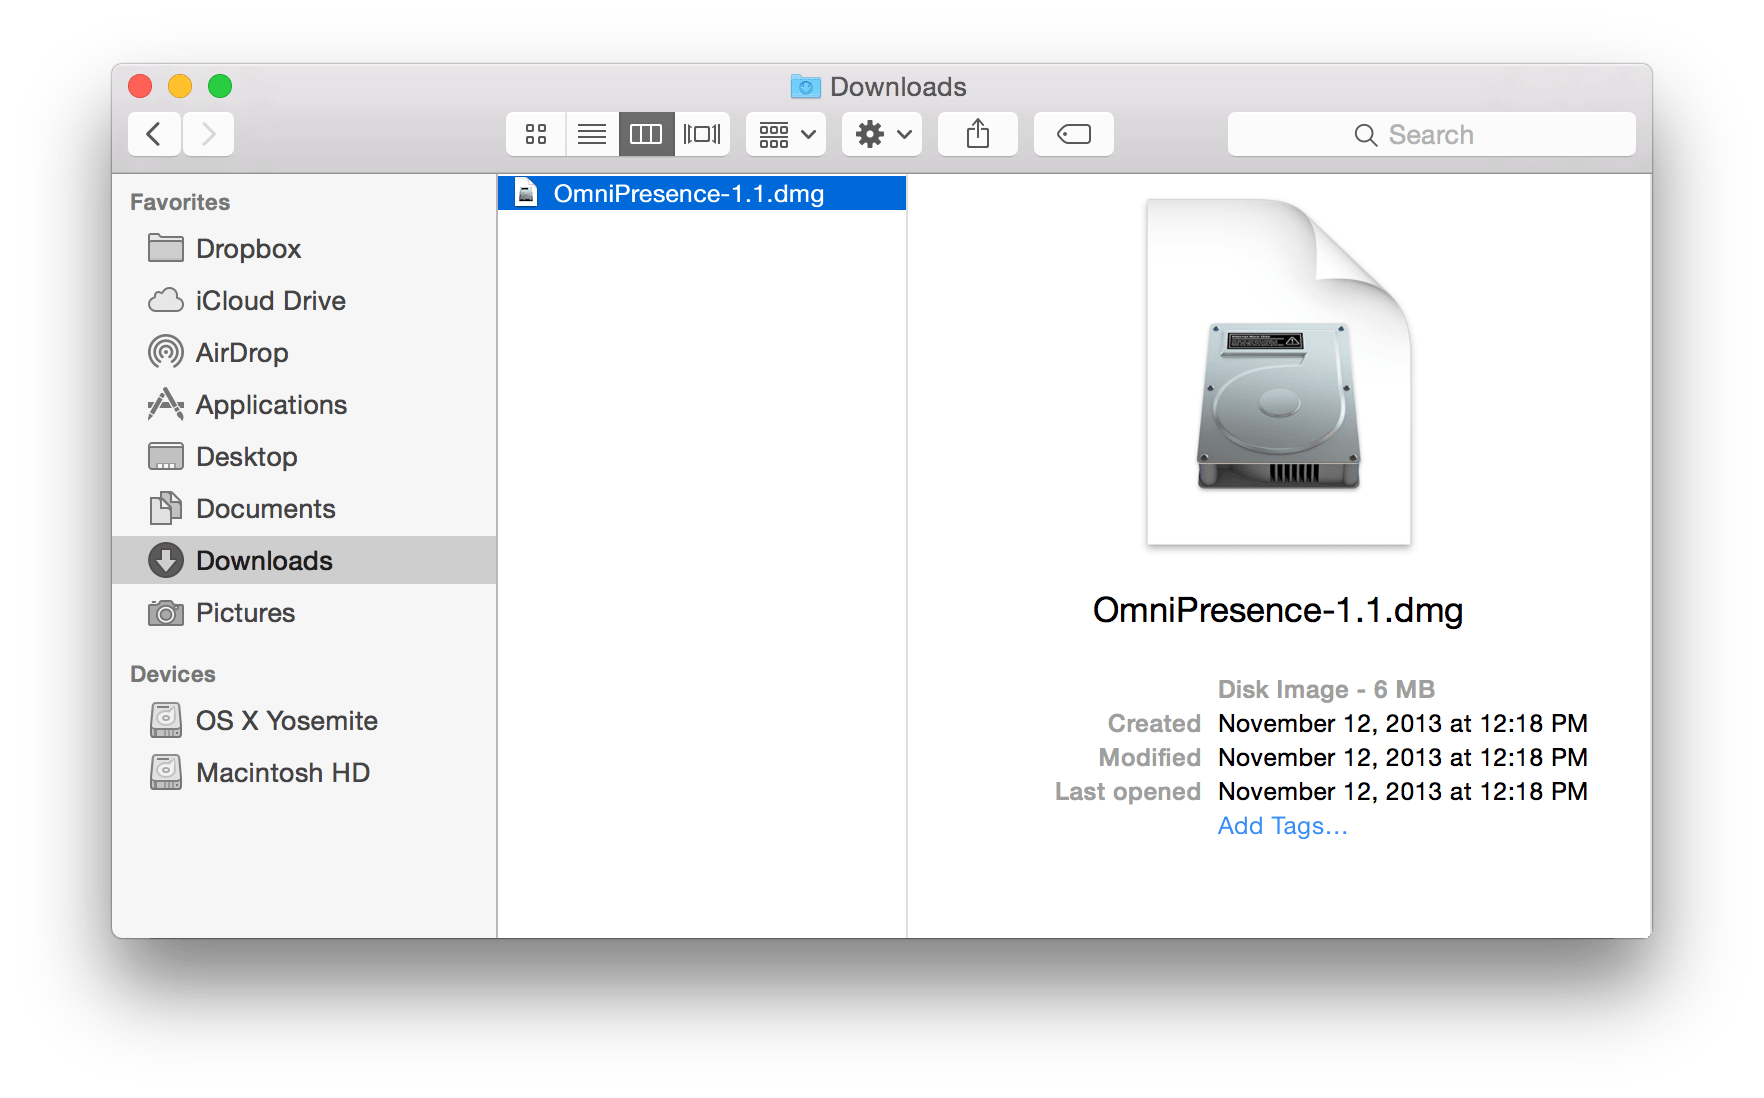 A Finder window, open to the Downloads folder to show the downloaded OmniPresence disk image.